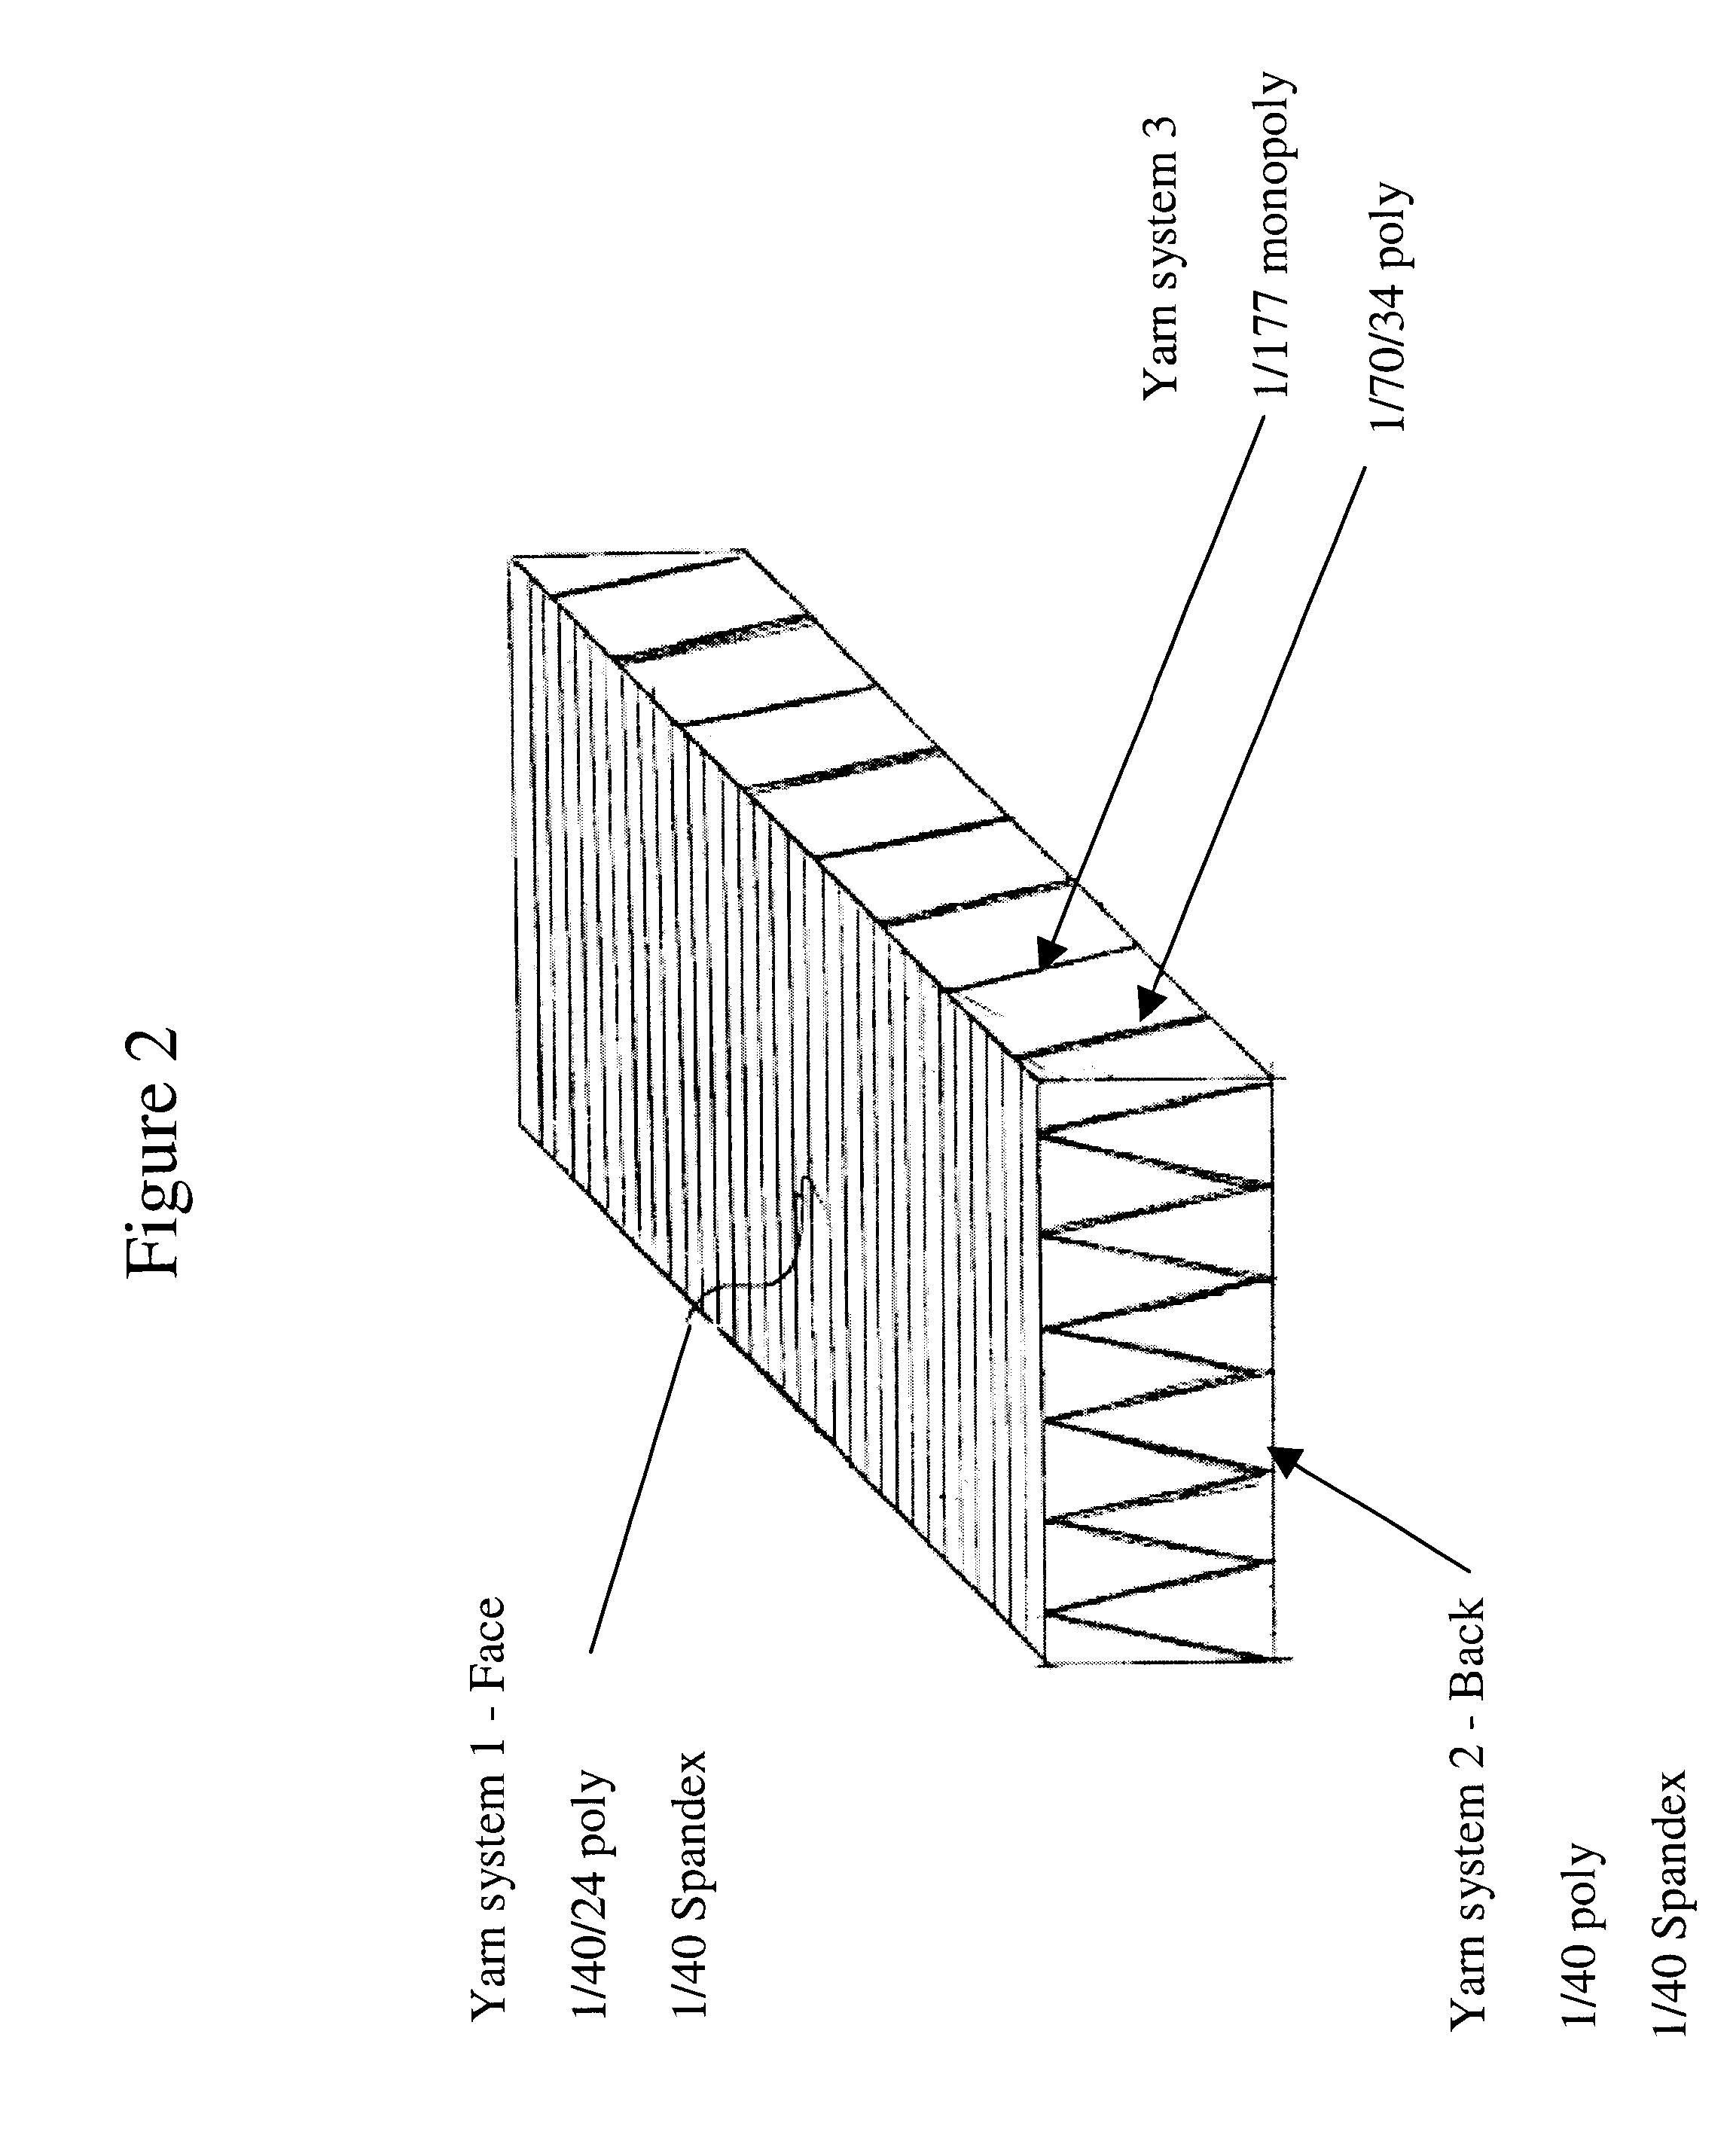 Knitted stretch spacer material and method of making